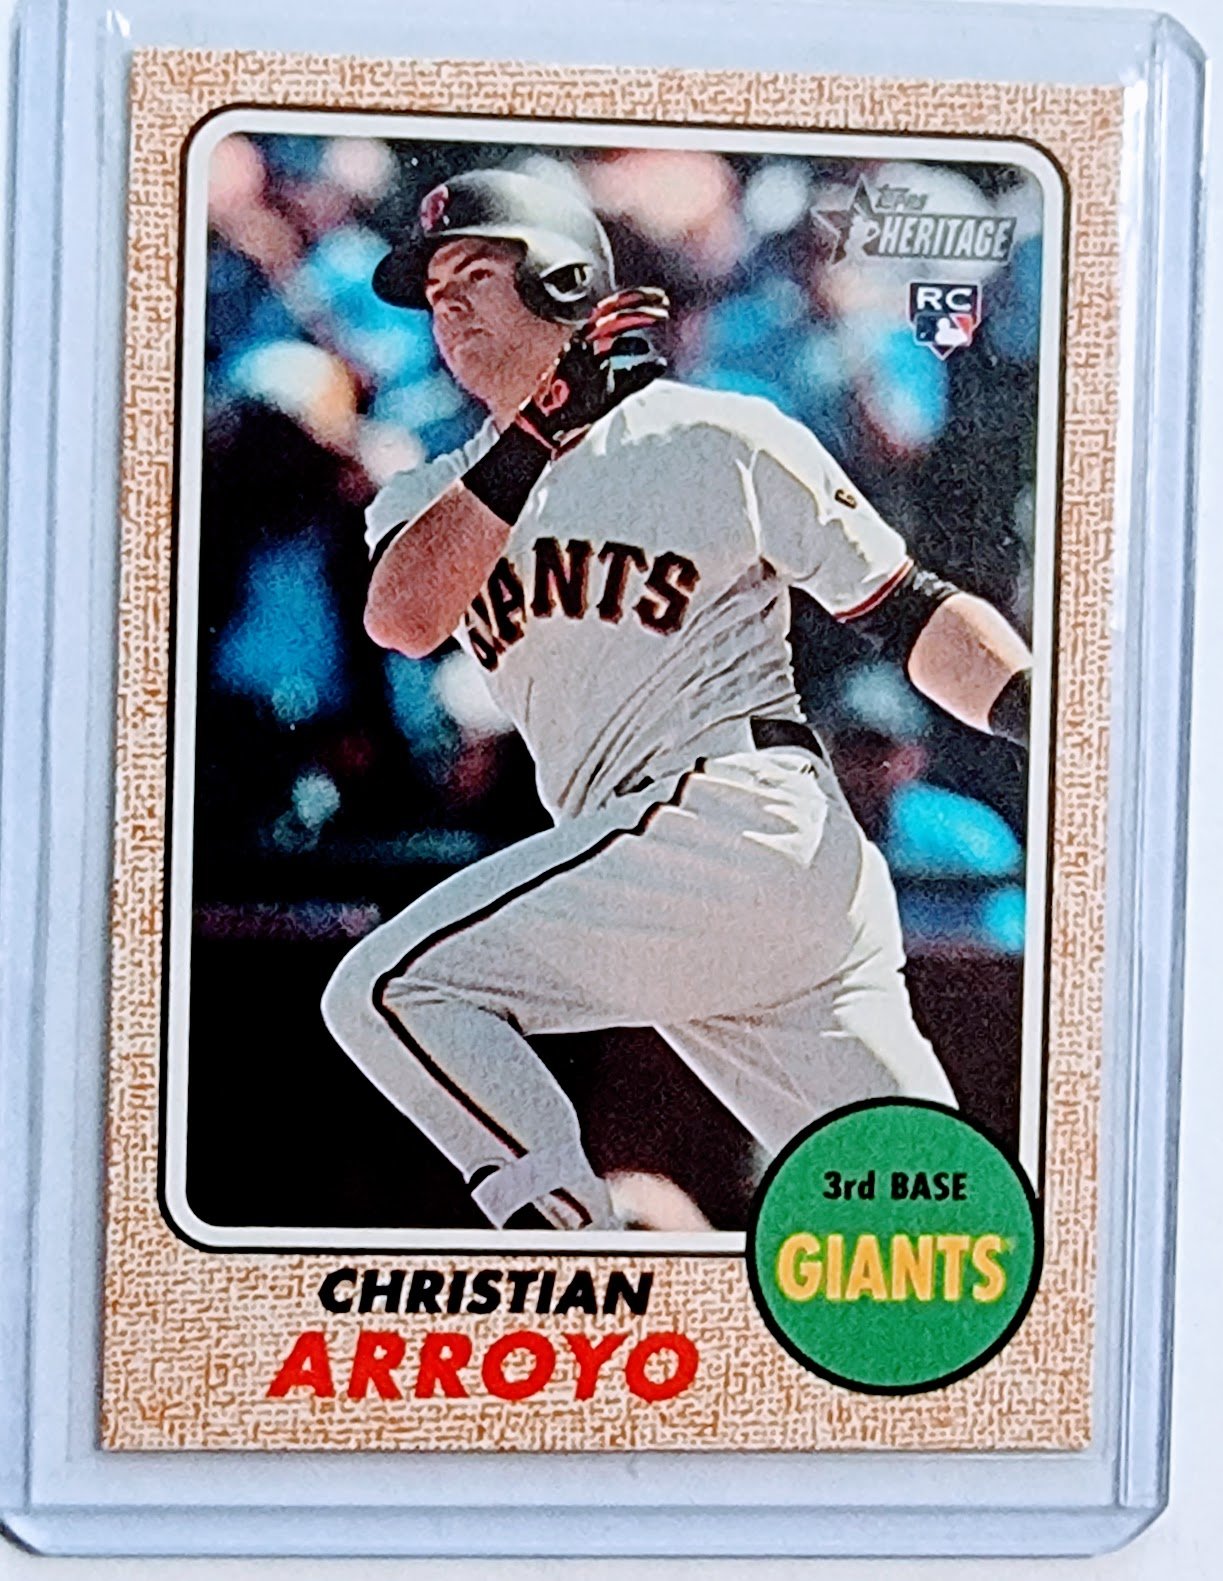 2017 Topps Heritage Christian Arroyo Action Variation SP Rookie Baseball Card TPTV simple Xclusive Collectibles   